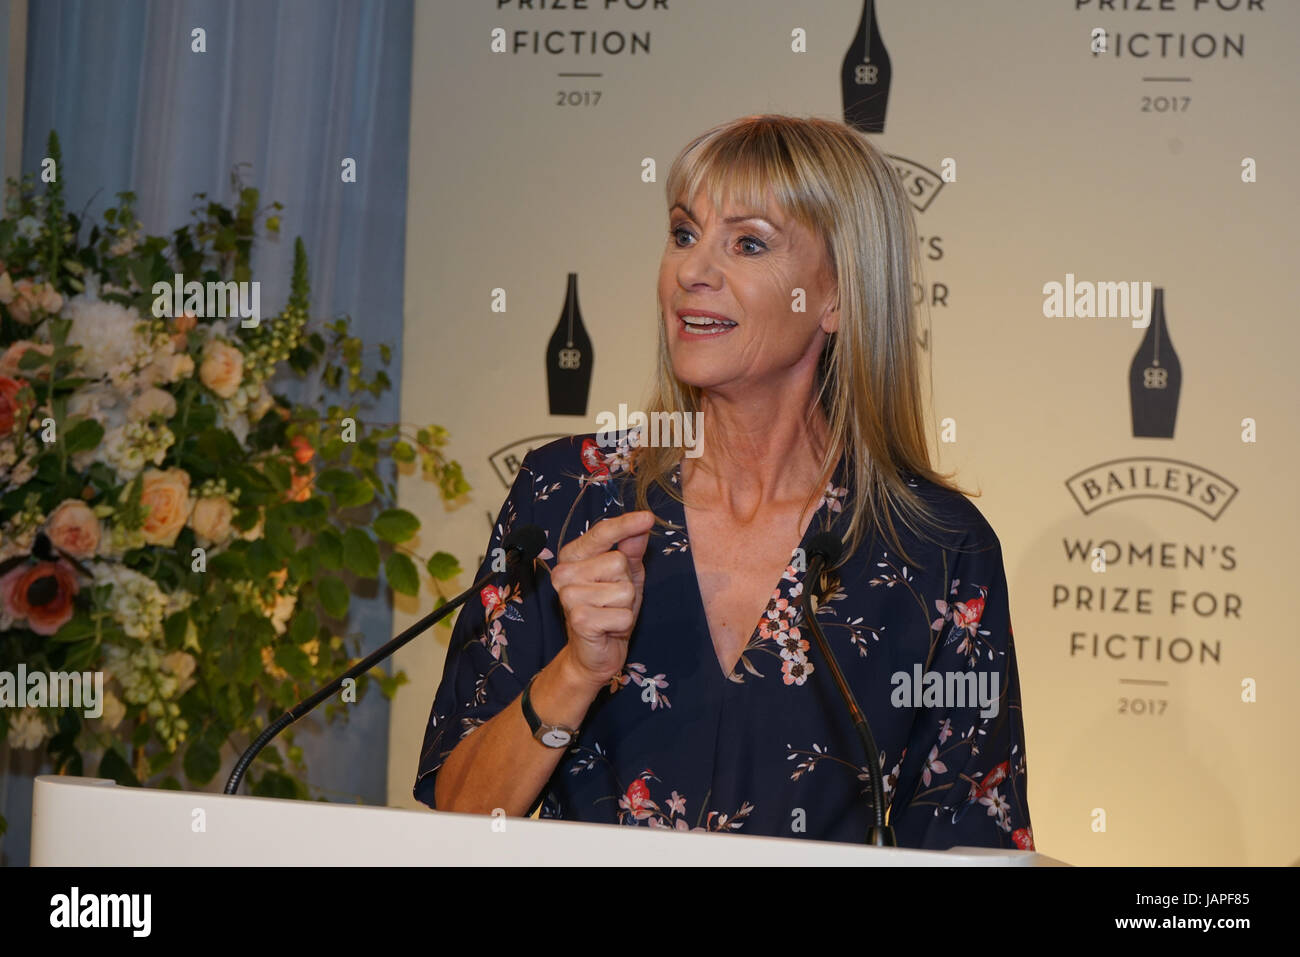 London, UK. 7th June, 2017. Kate Mosse attends a photocall The Baileys Prize for Women's Fiction Awards 2017 at the The Royal Festival Hall, Southbank Centre. by Credit: See Li/Alamy Live News Stock Photo